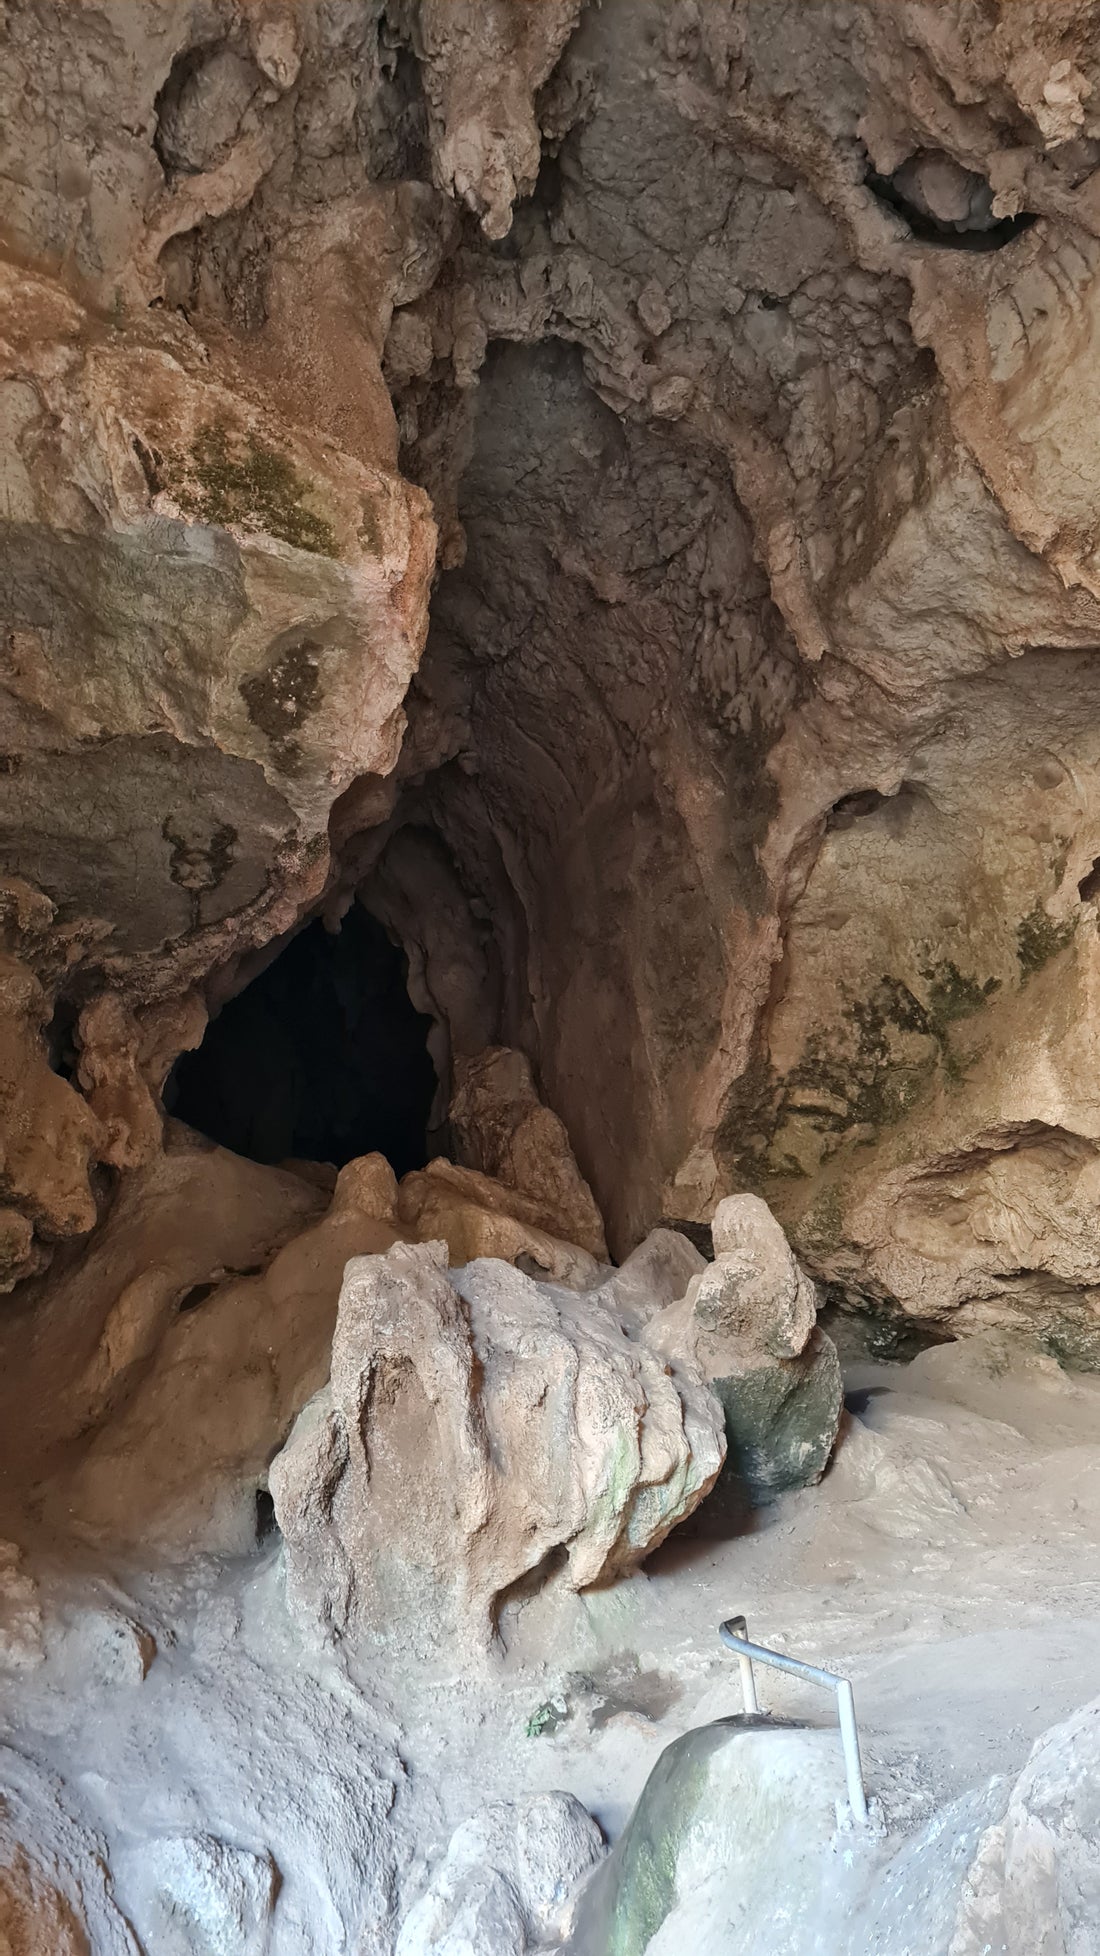 An image of a cave featuring sculpted rock and a dark hole. In the foreground is a railing to assist walkers